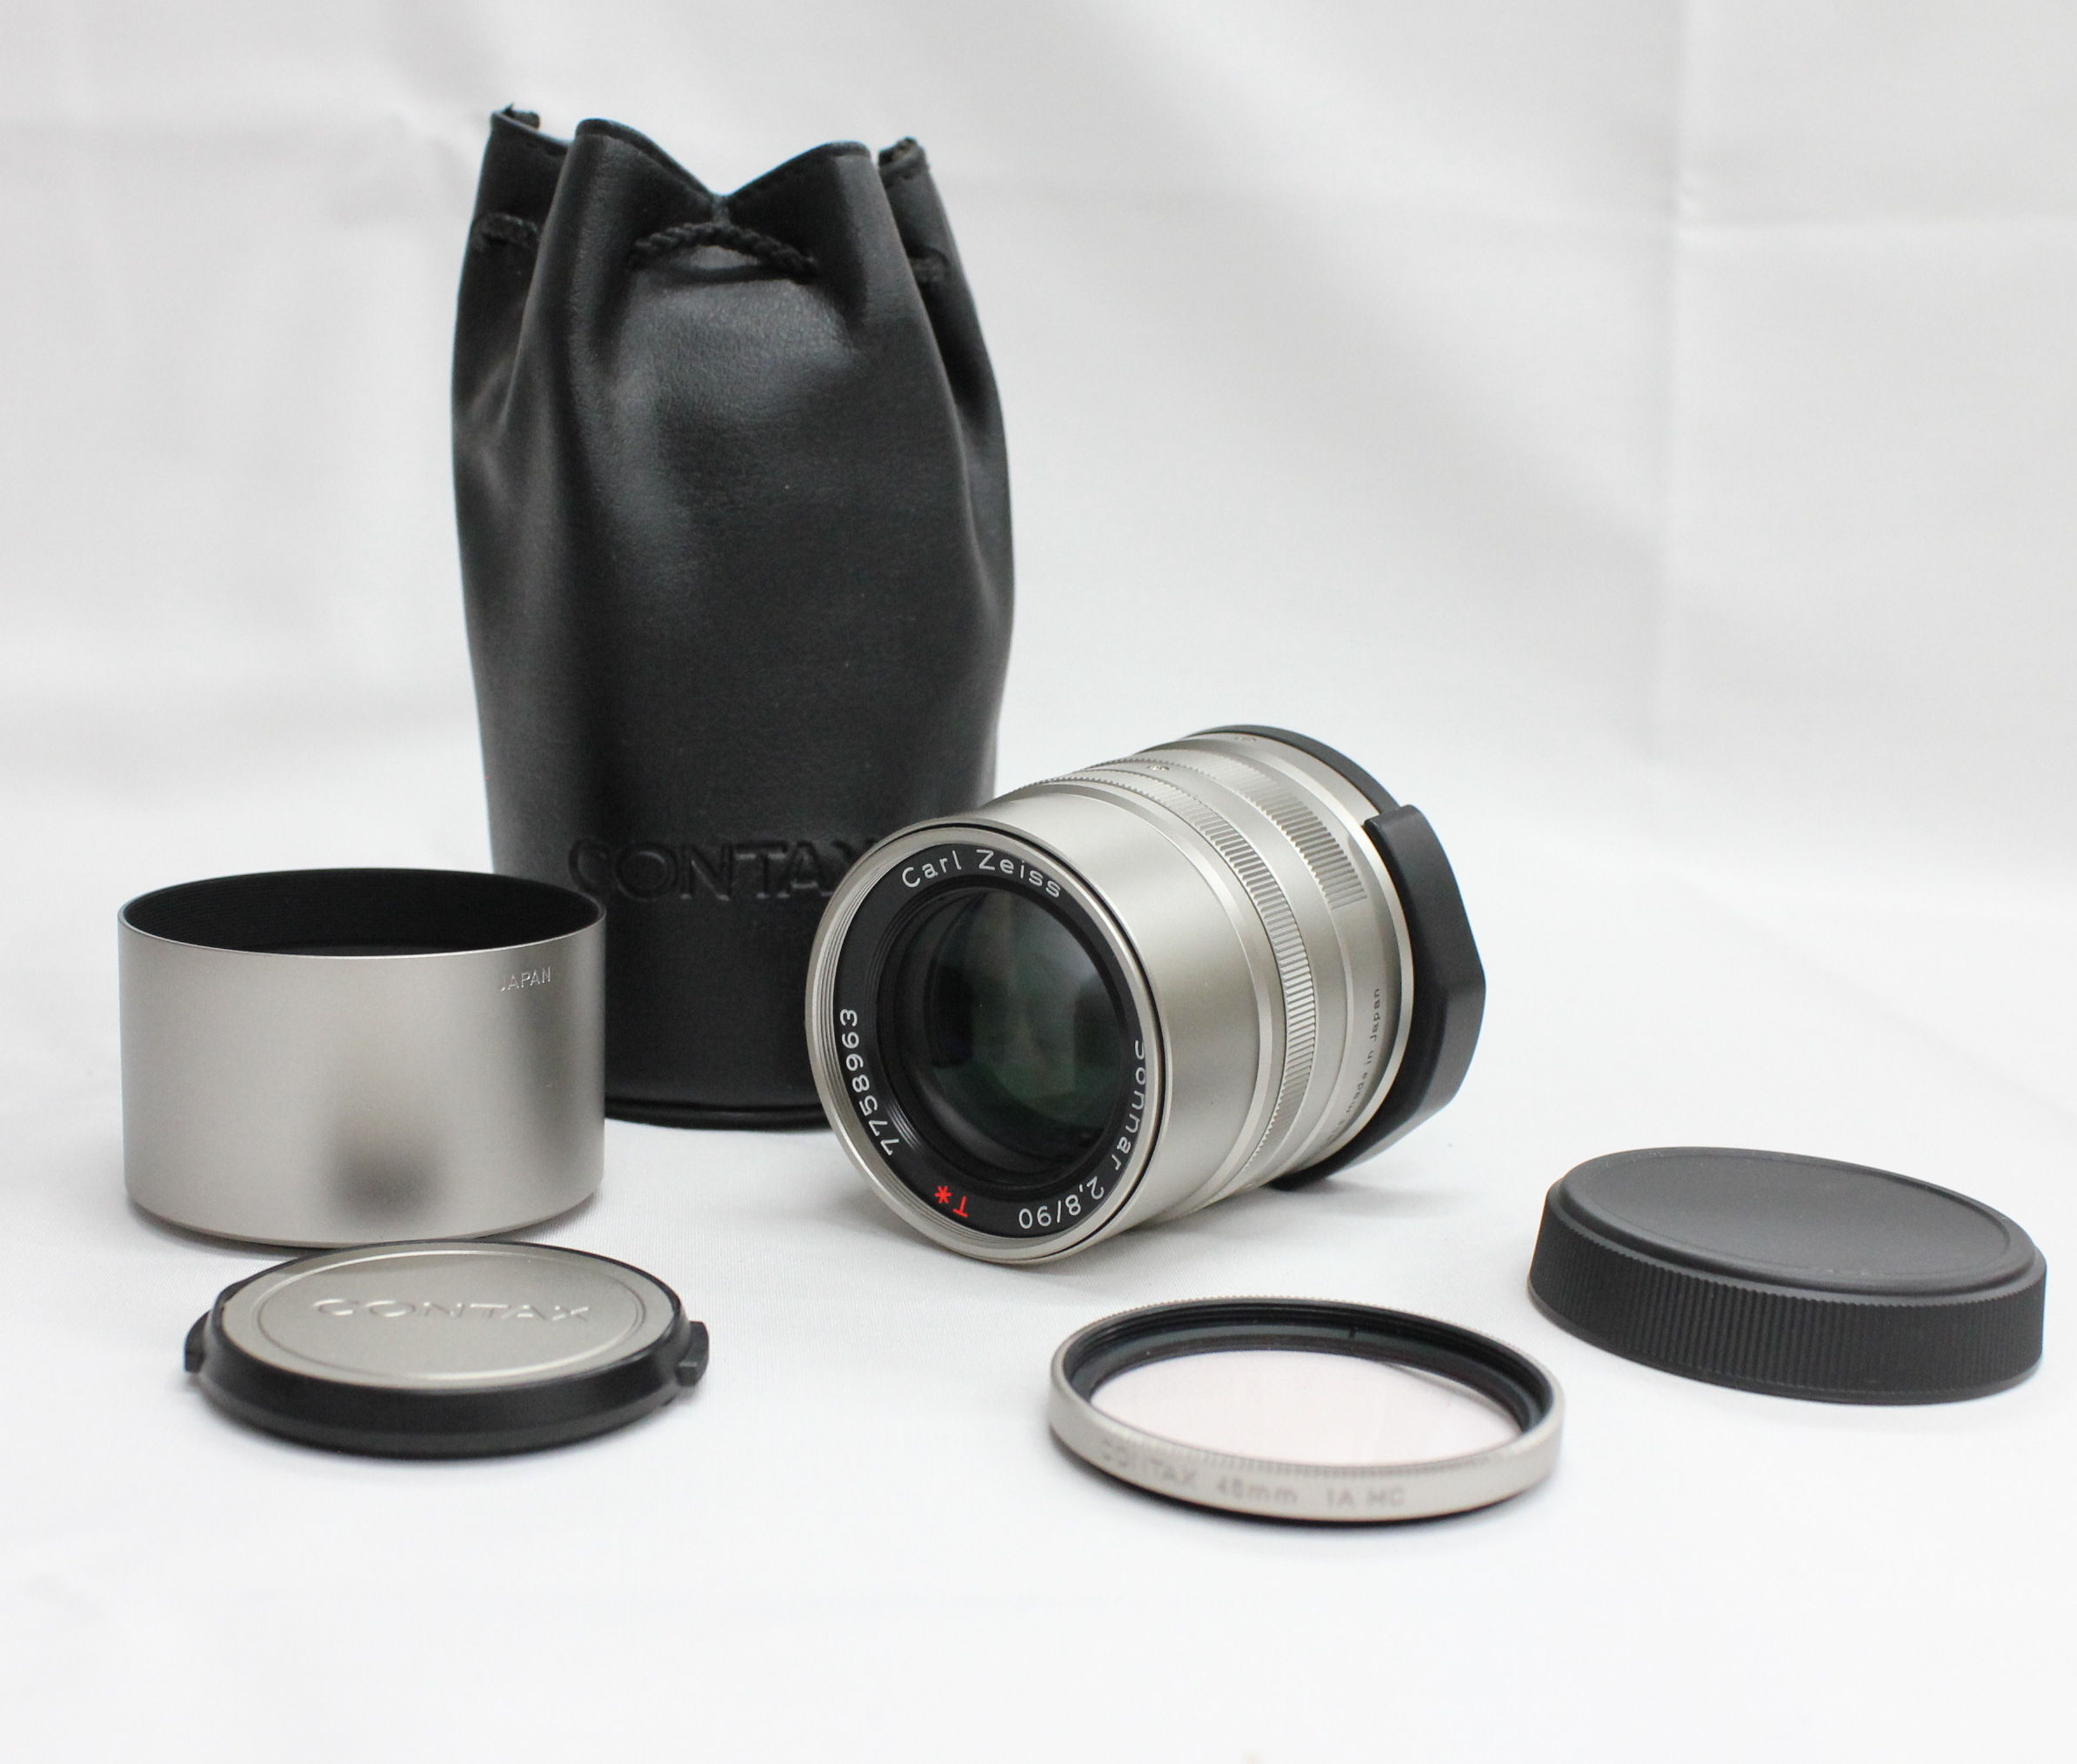 Japan Used Camera Shop | [Mint] Contax Carl Zeiss Sonnar 90mm F/2.8 T* AF Lens with Hood/Filter/Case for G1 G2 from JAPAN